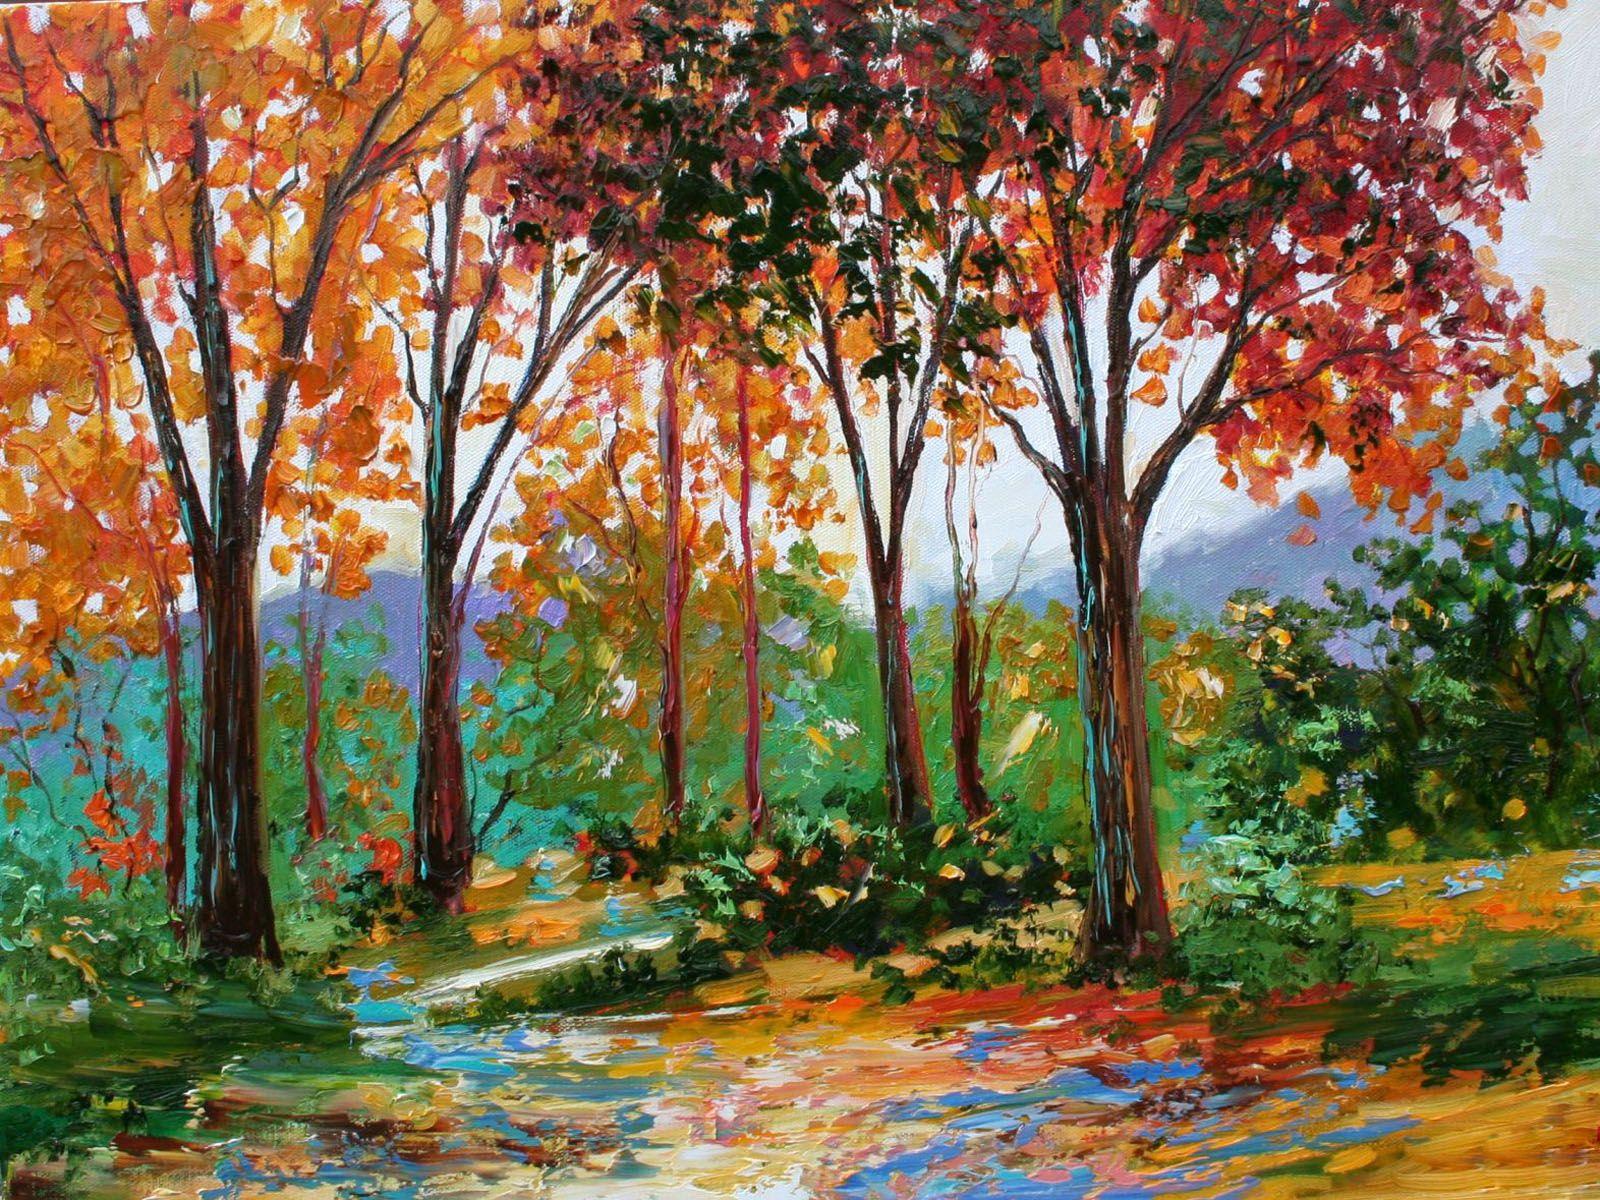 XS Wallpaper HD: Autumn Oil Paintings. Painting, Autumn painting, Oil painting